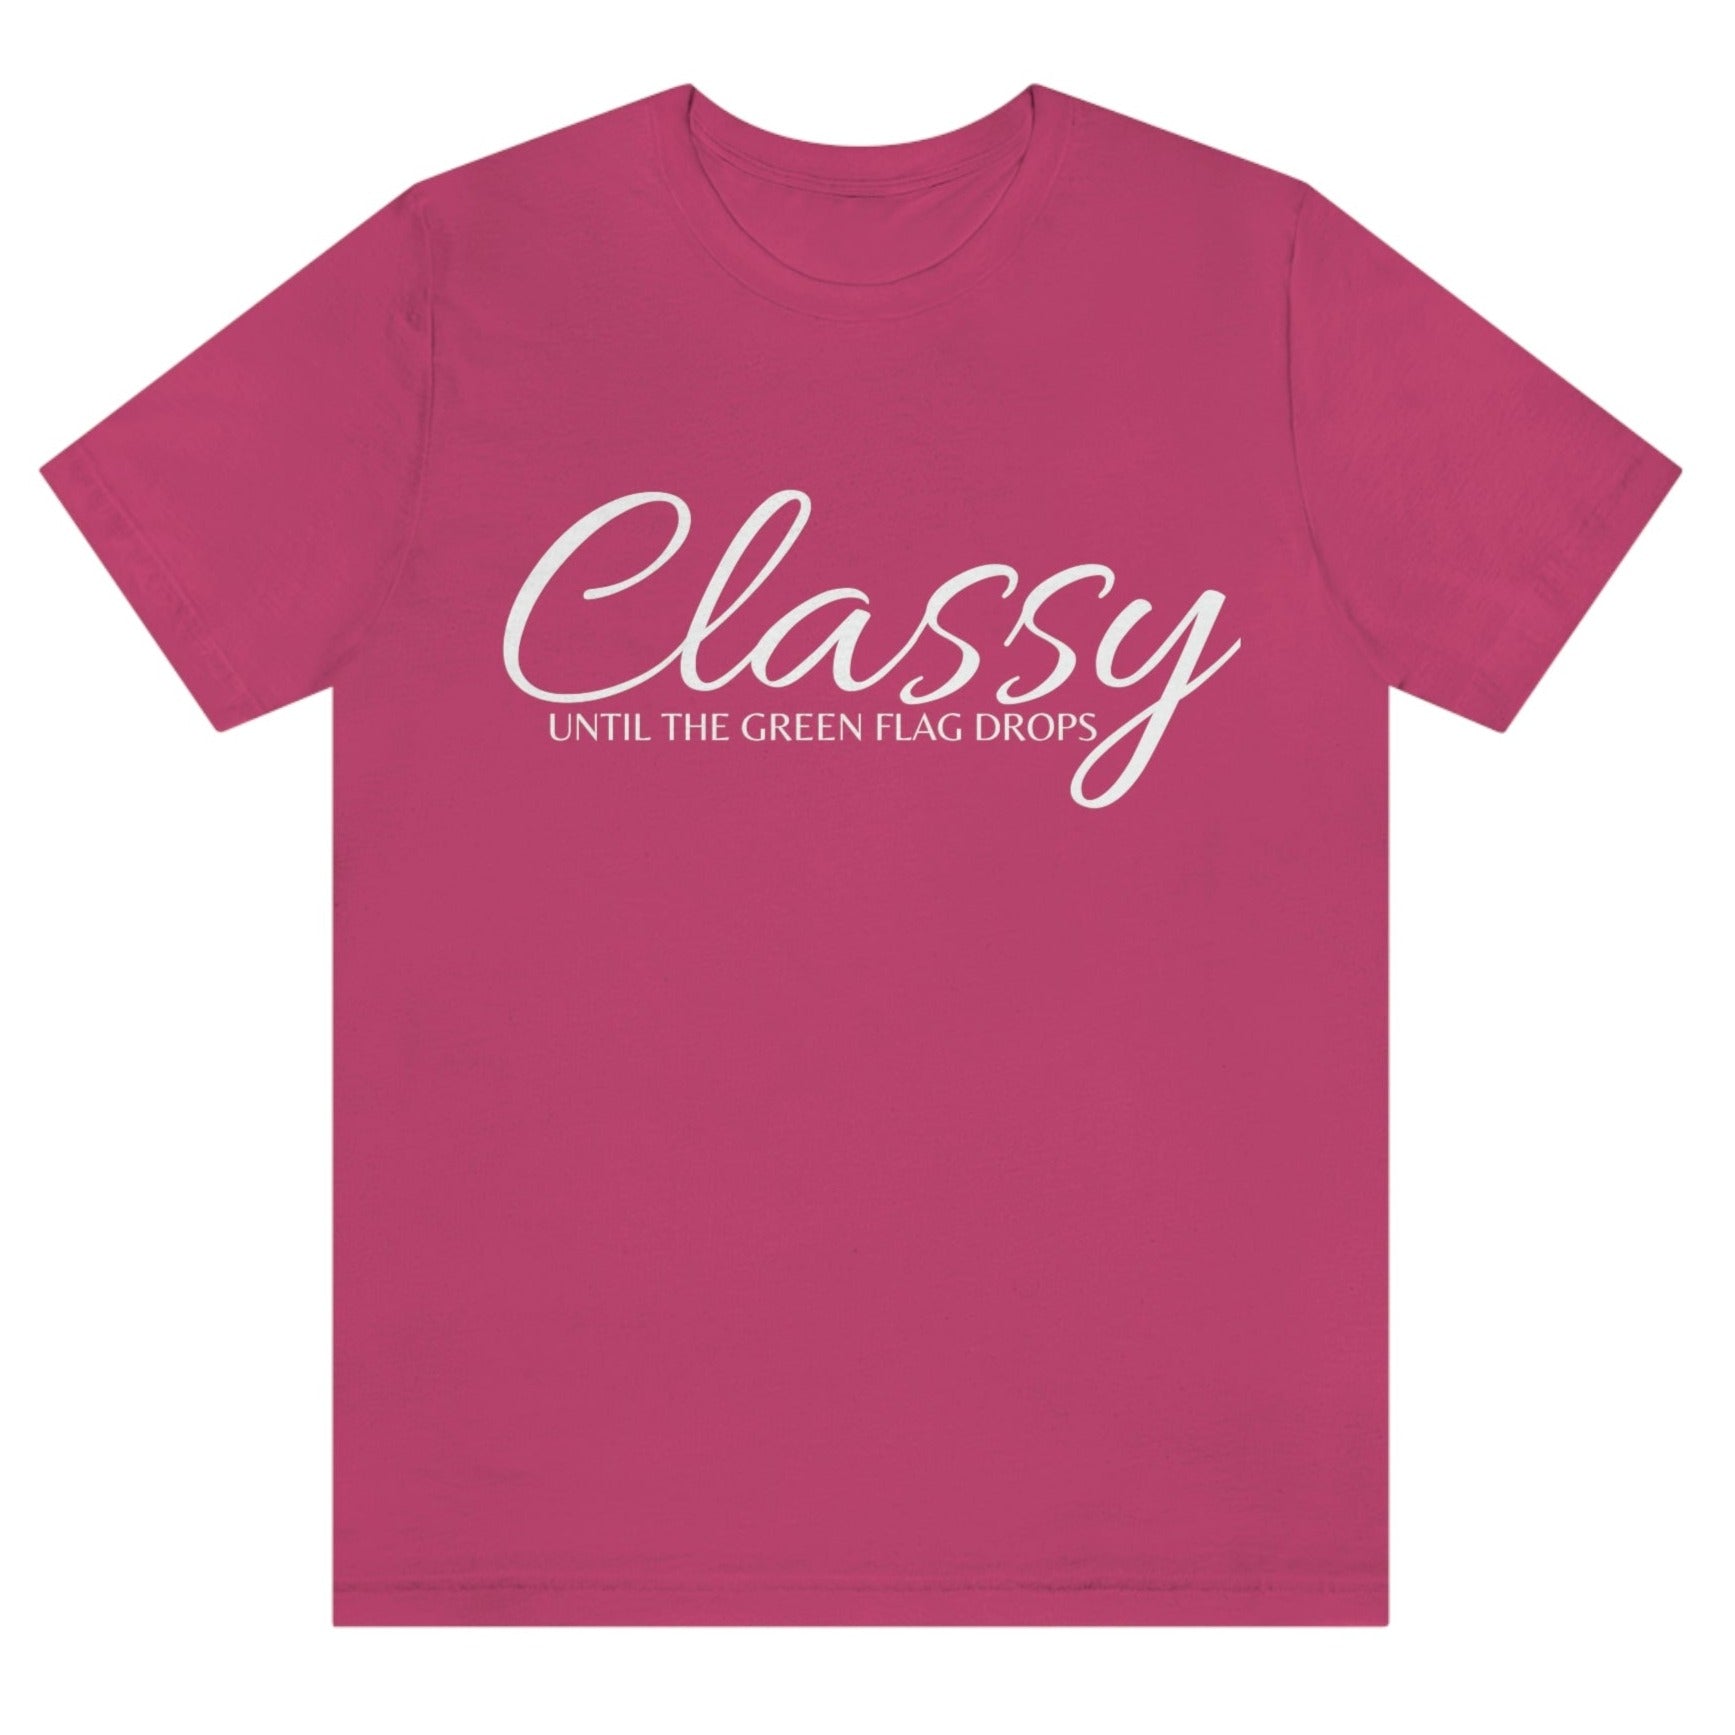 classy-until-the-green-flag-drops-berry-t-shirt-racing-womens